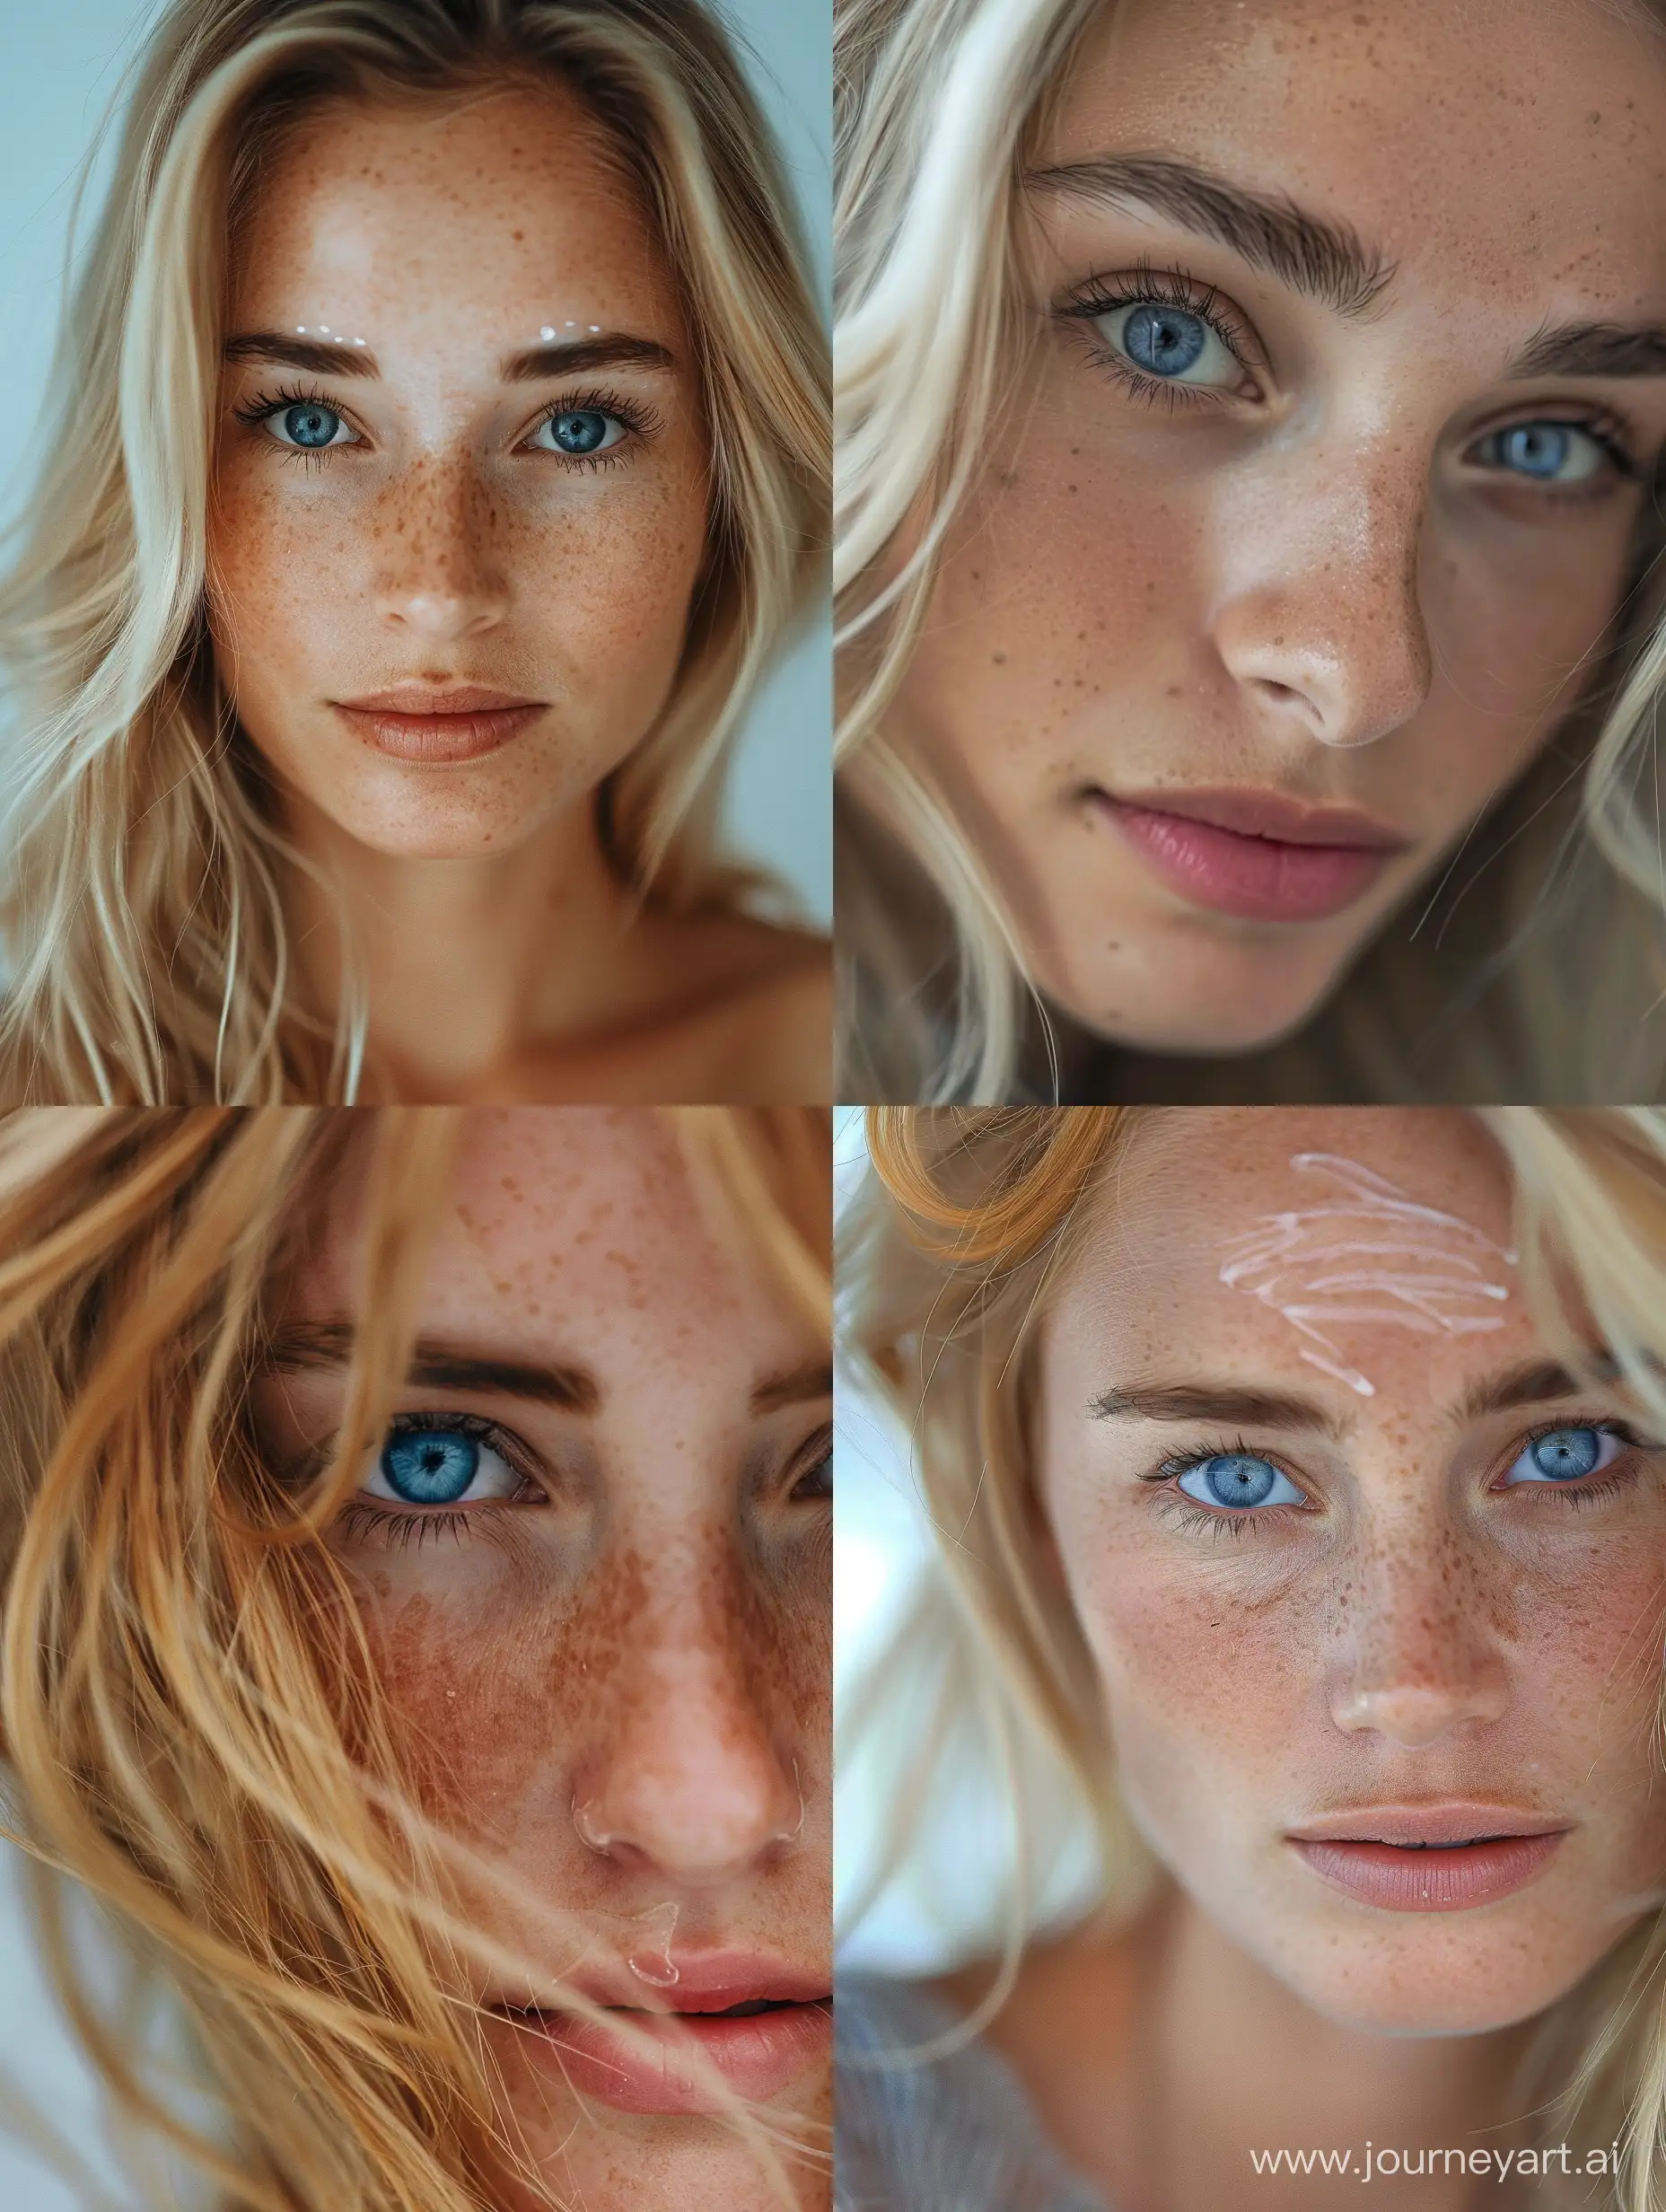 Blonde-Woman-with-Blue-Eyes-Undergoing-Laser-Hair-Removal-Procedure